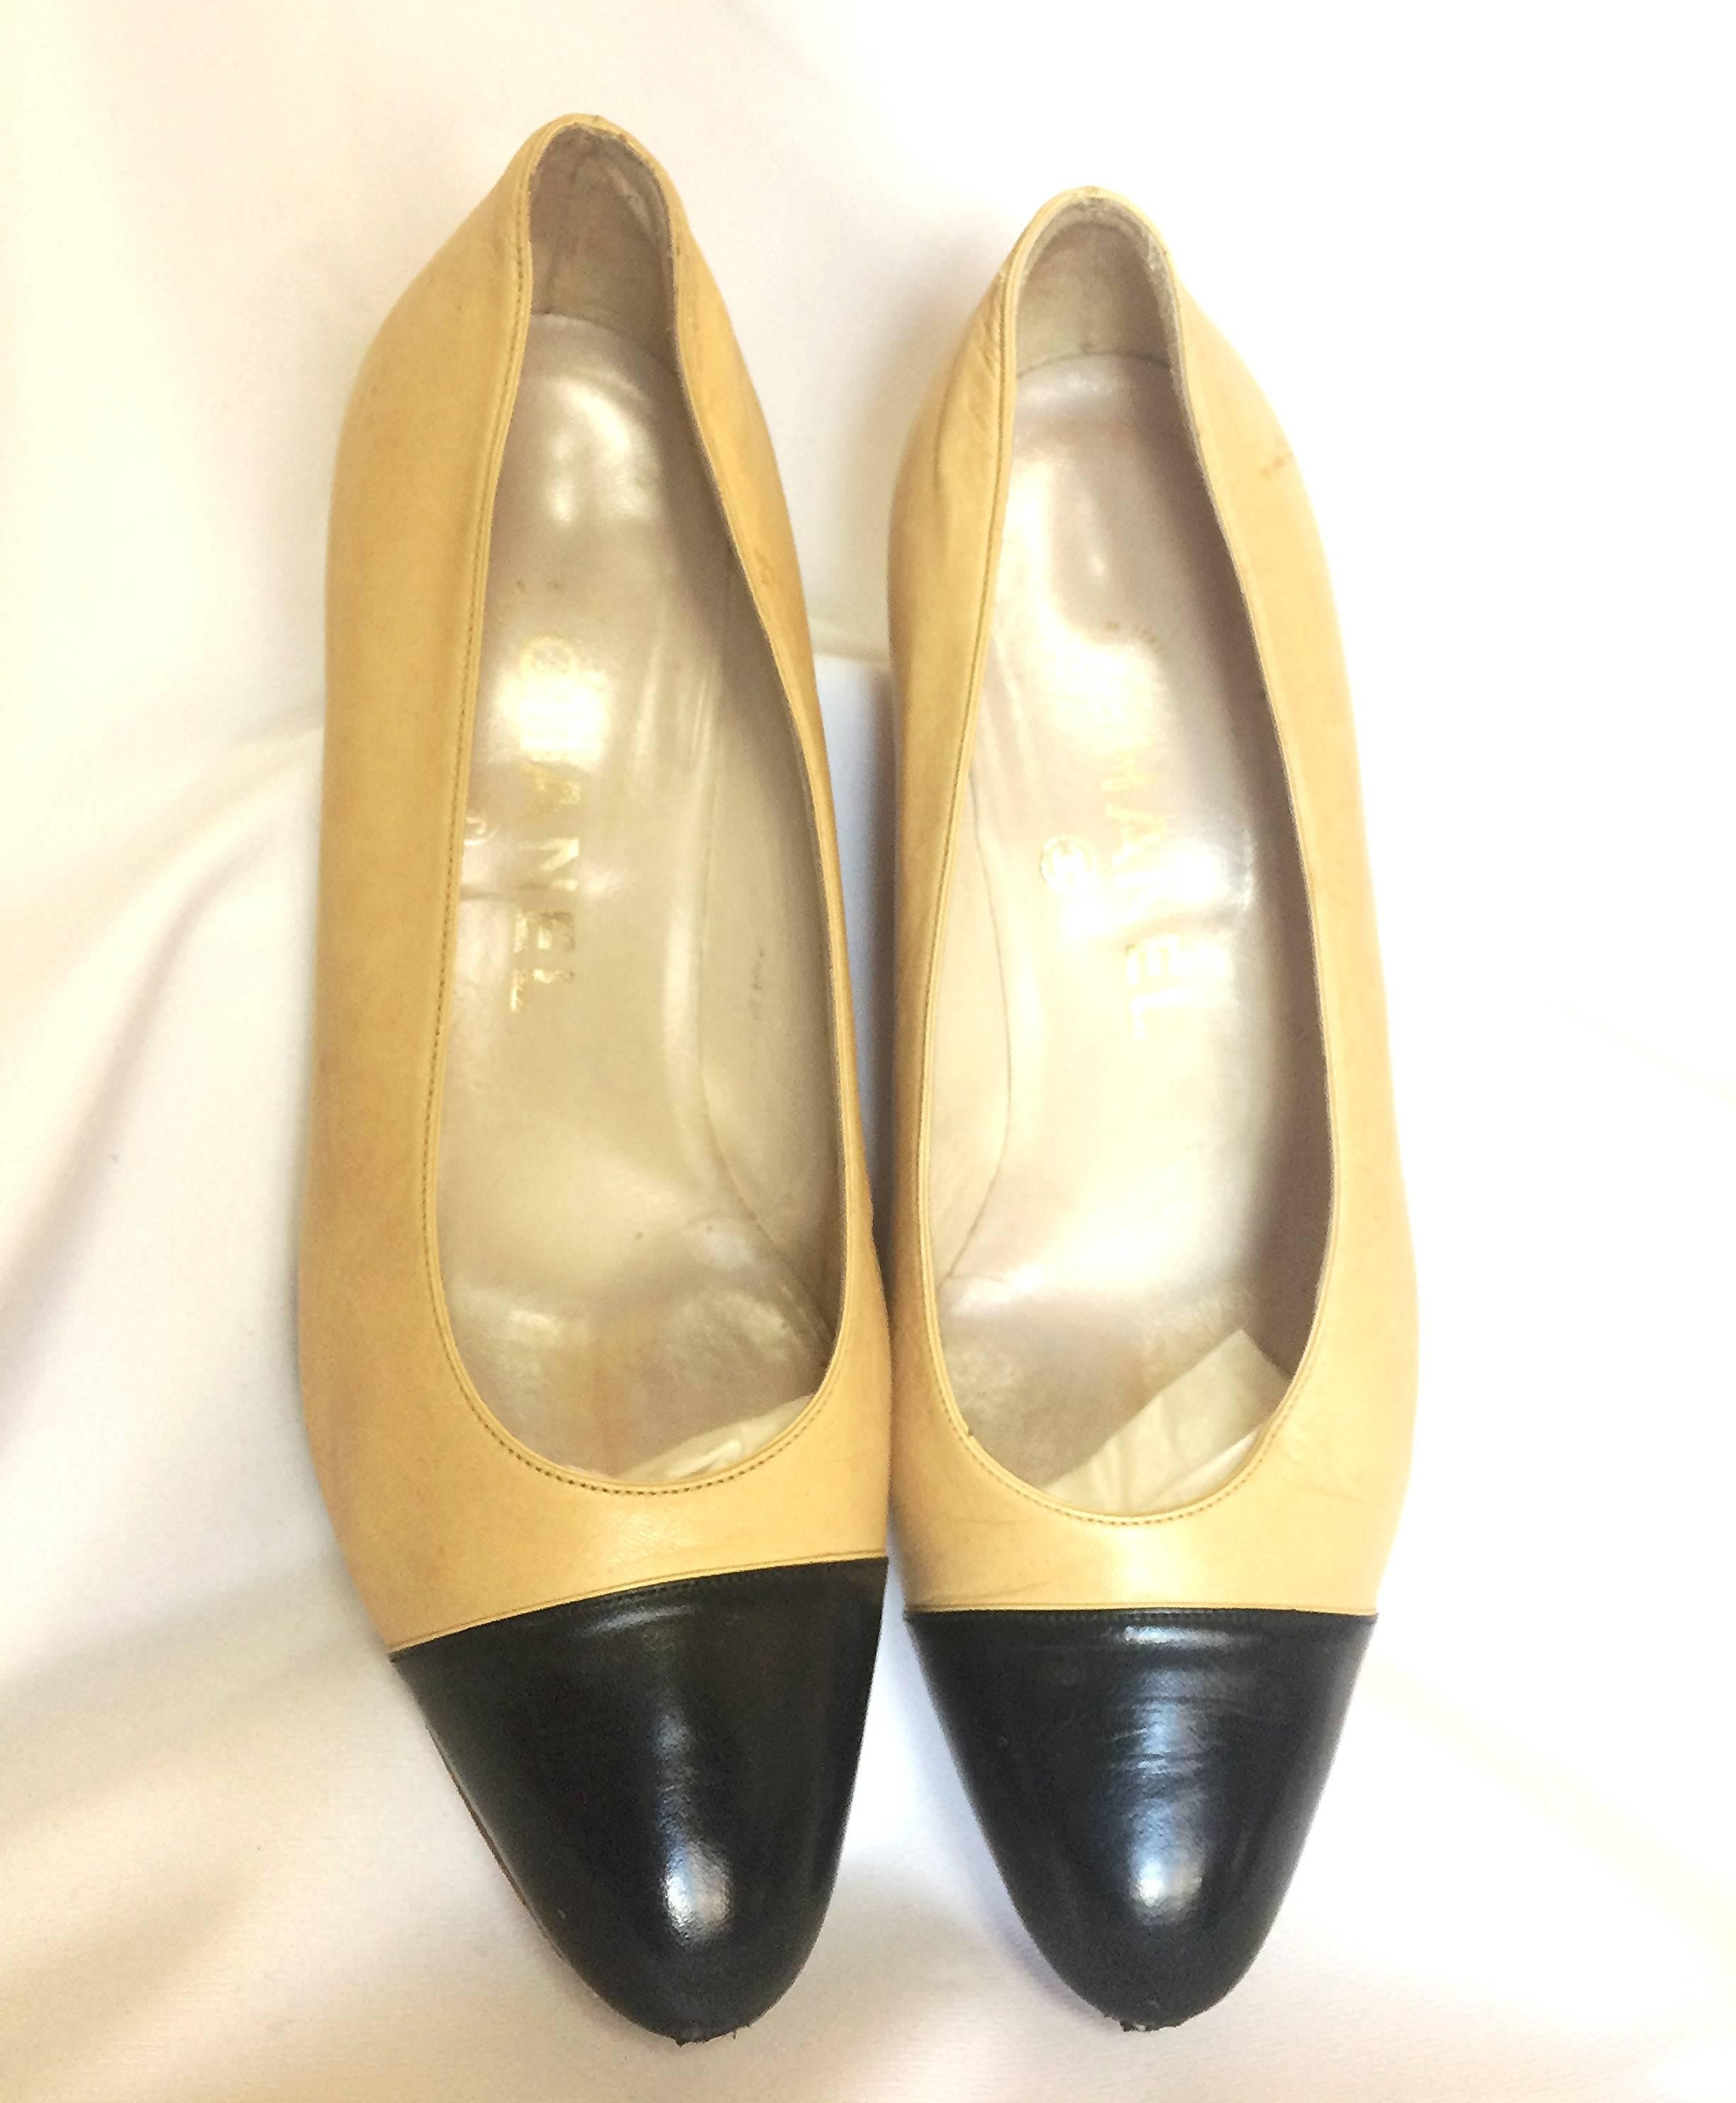 1990s. Vintage CHANEL beige and black leather shoes, classic pumps.  EU 36, US5.5. small size.

This is a classic vintage mid pointy heel shoes in classic beige and black leather combination from CHANEL. 

Some wrinkles, darkening, light brown